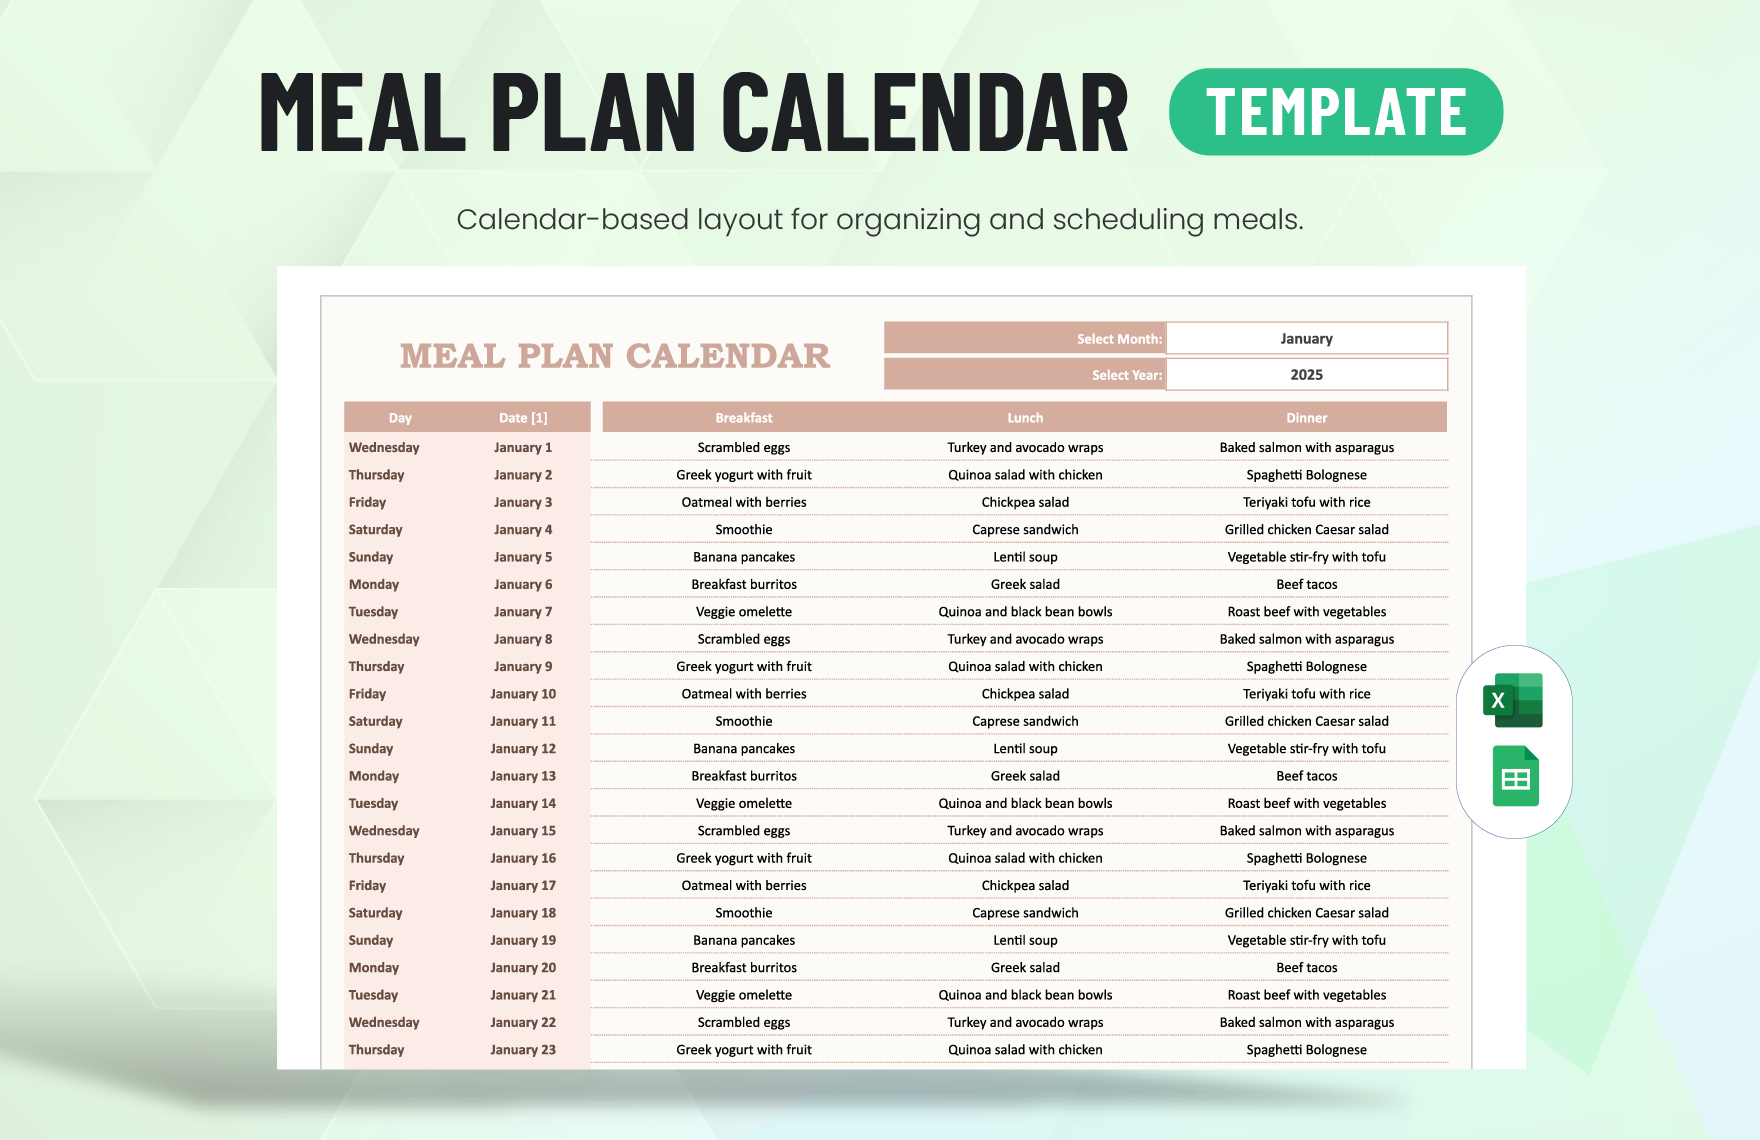 Meal Plan Calendar Template in Excel, Google Sheets